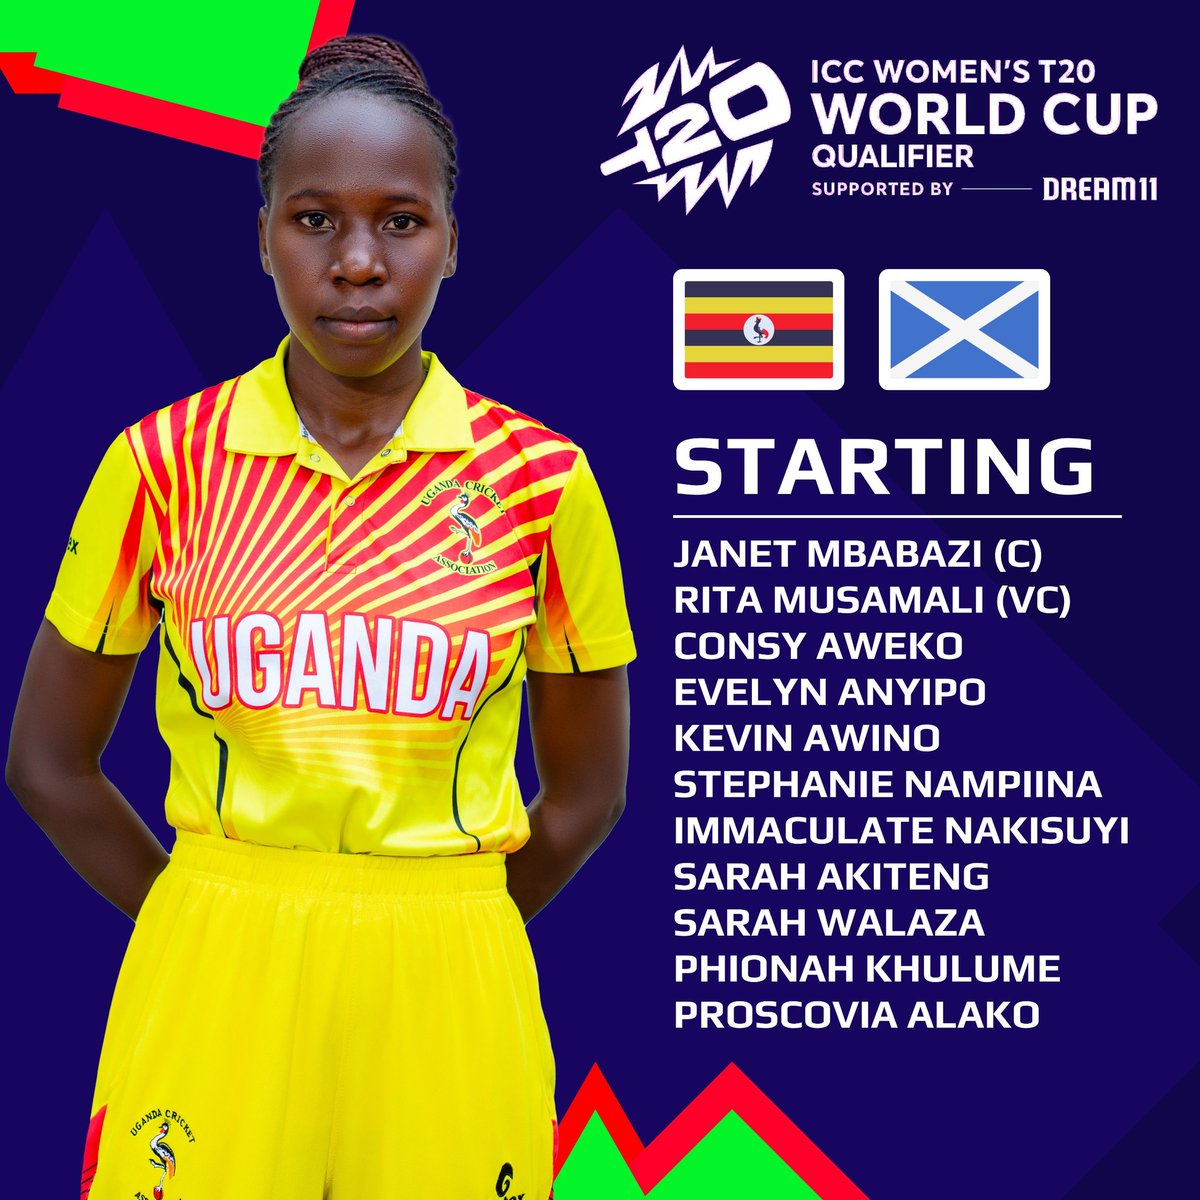 Game time: Uganda 🇺🇬 won the toss and elected to bowl 

Live score link 👇 

icc-cricket.com/matches/242976… 

Watch via icc.tv 

#LetsGoVictoriaPearls